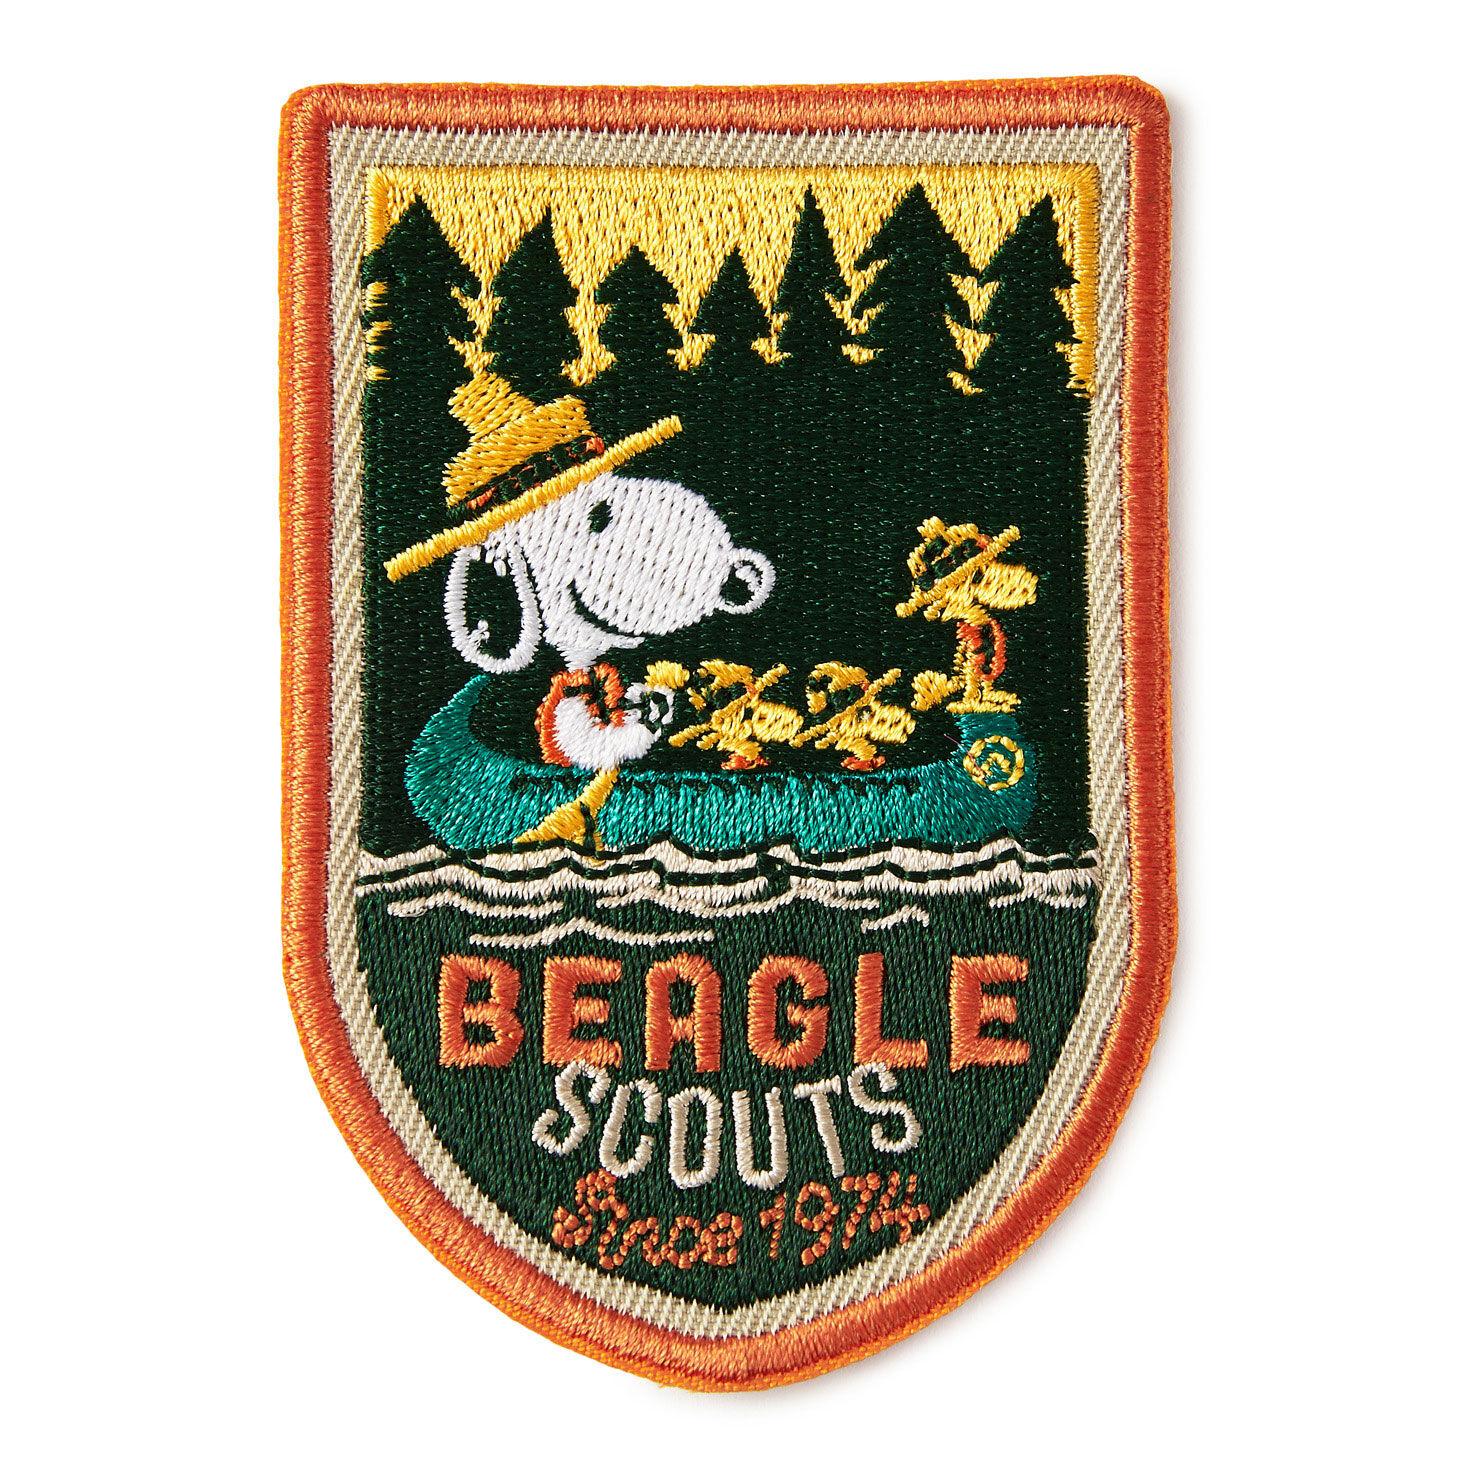 Hallmark Peanuts® Beagle Scouts Patches, Set of 2 for only USD